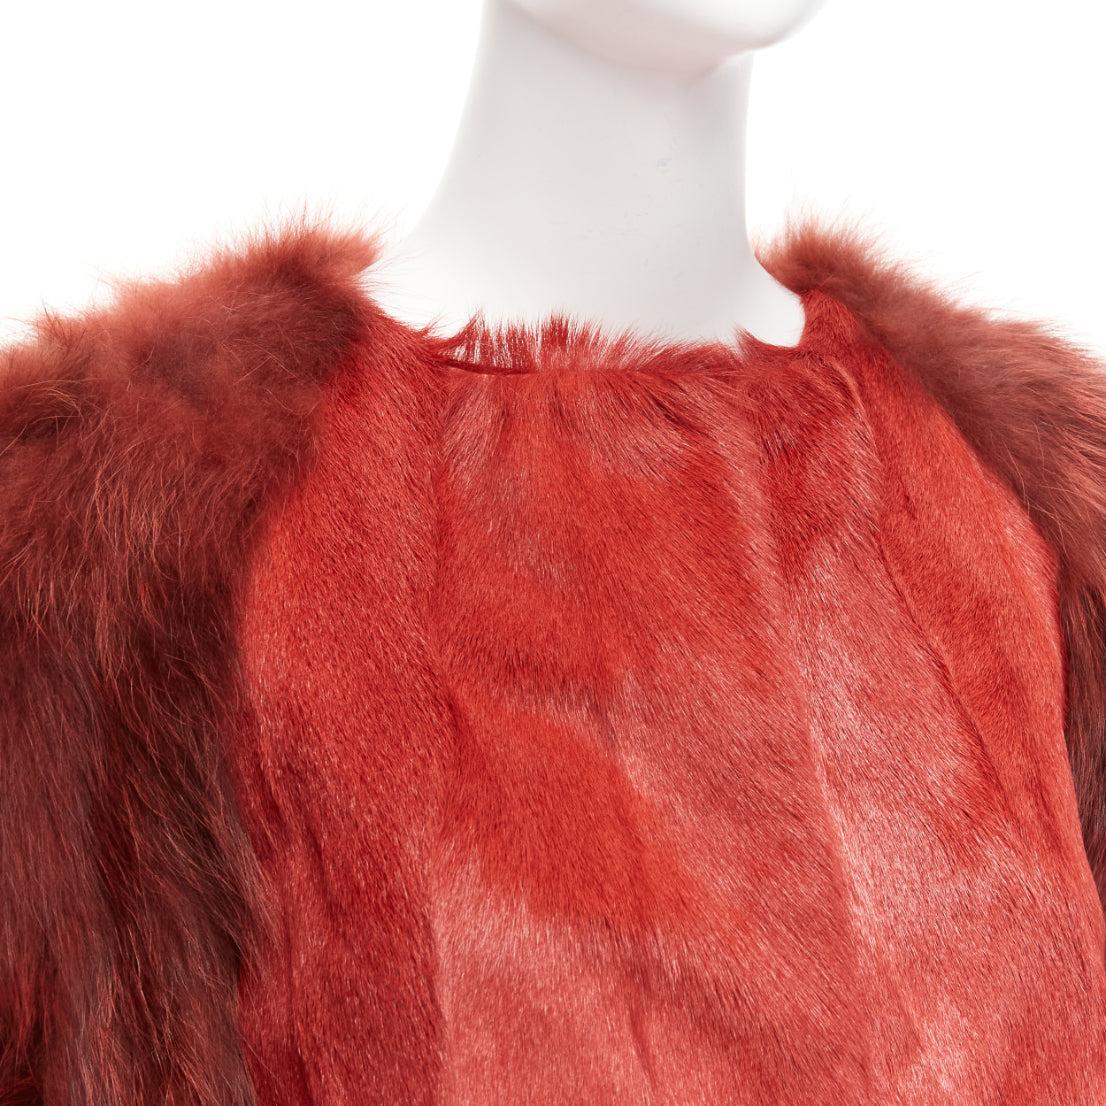 GIAMBATTISTA VALLI red genuine fur patchwork contrast raglan sleeve long coat
Reference: NKLL/A00137
Brand: Giambattista Valli
Material: Fur
Color: Red
Pattern: Solid
Closure: Snap Buttons
Lining: Red Fabric
Made in: Italy

CONDITION:
Condition: